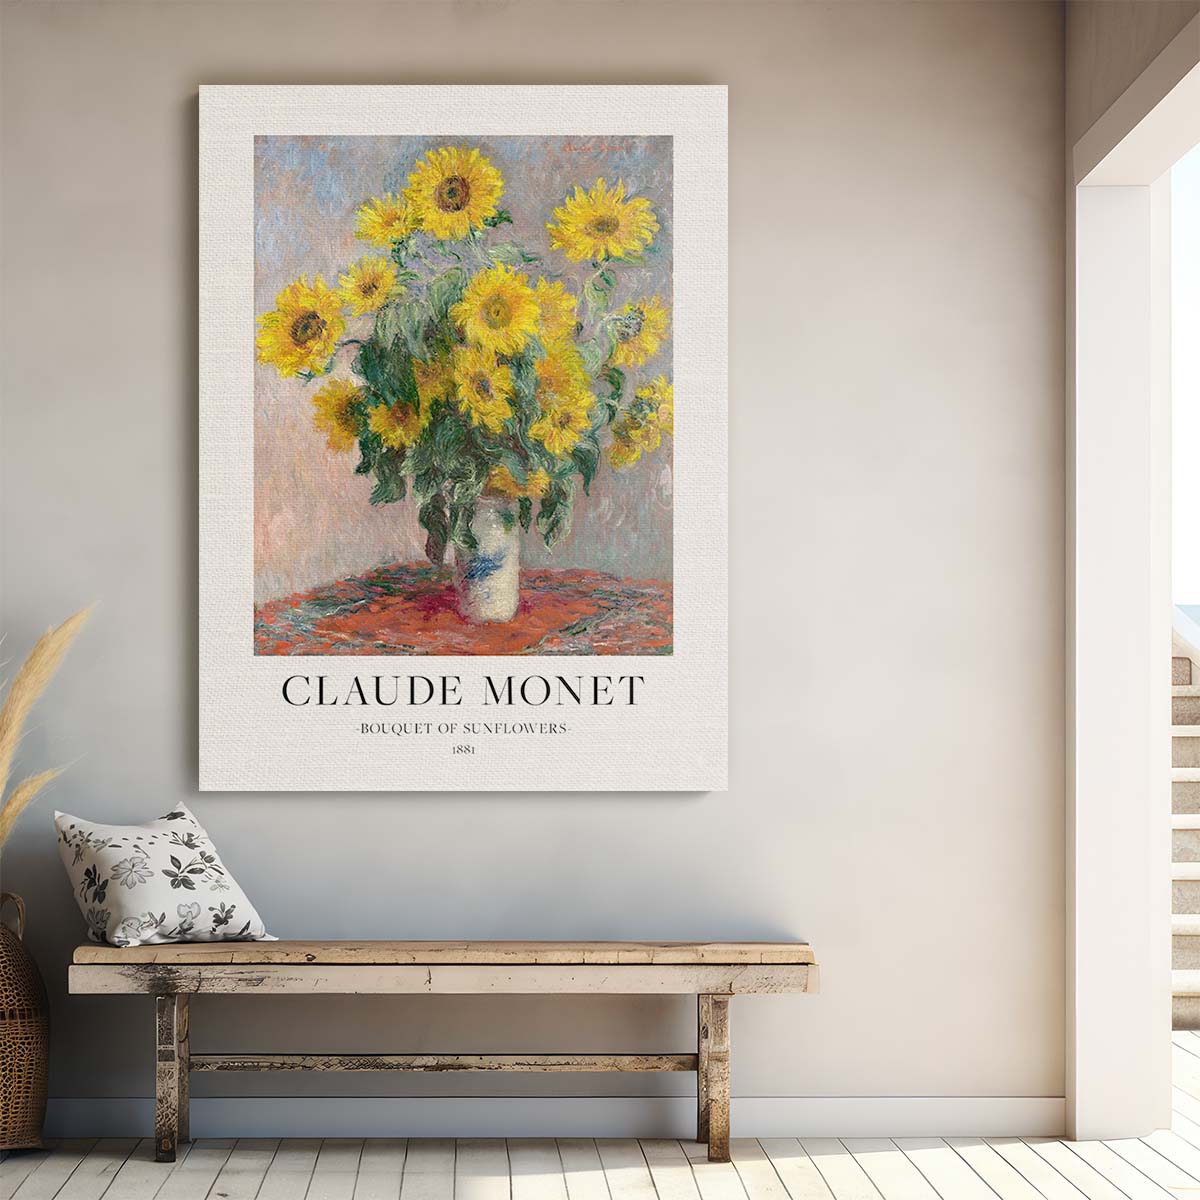 Claude Monet's Masterpiece Bouquet of Sunflowers Oil Painting Poster by Luxuriance Designs, made in USA